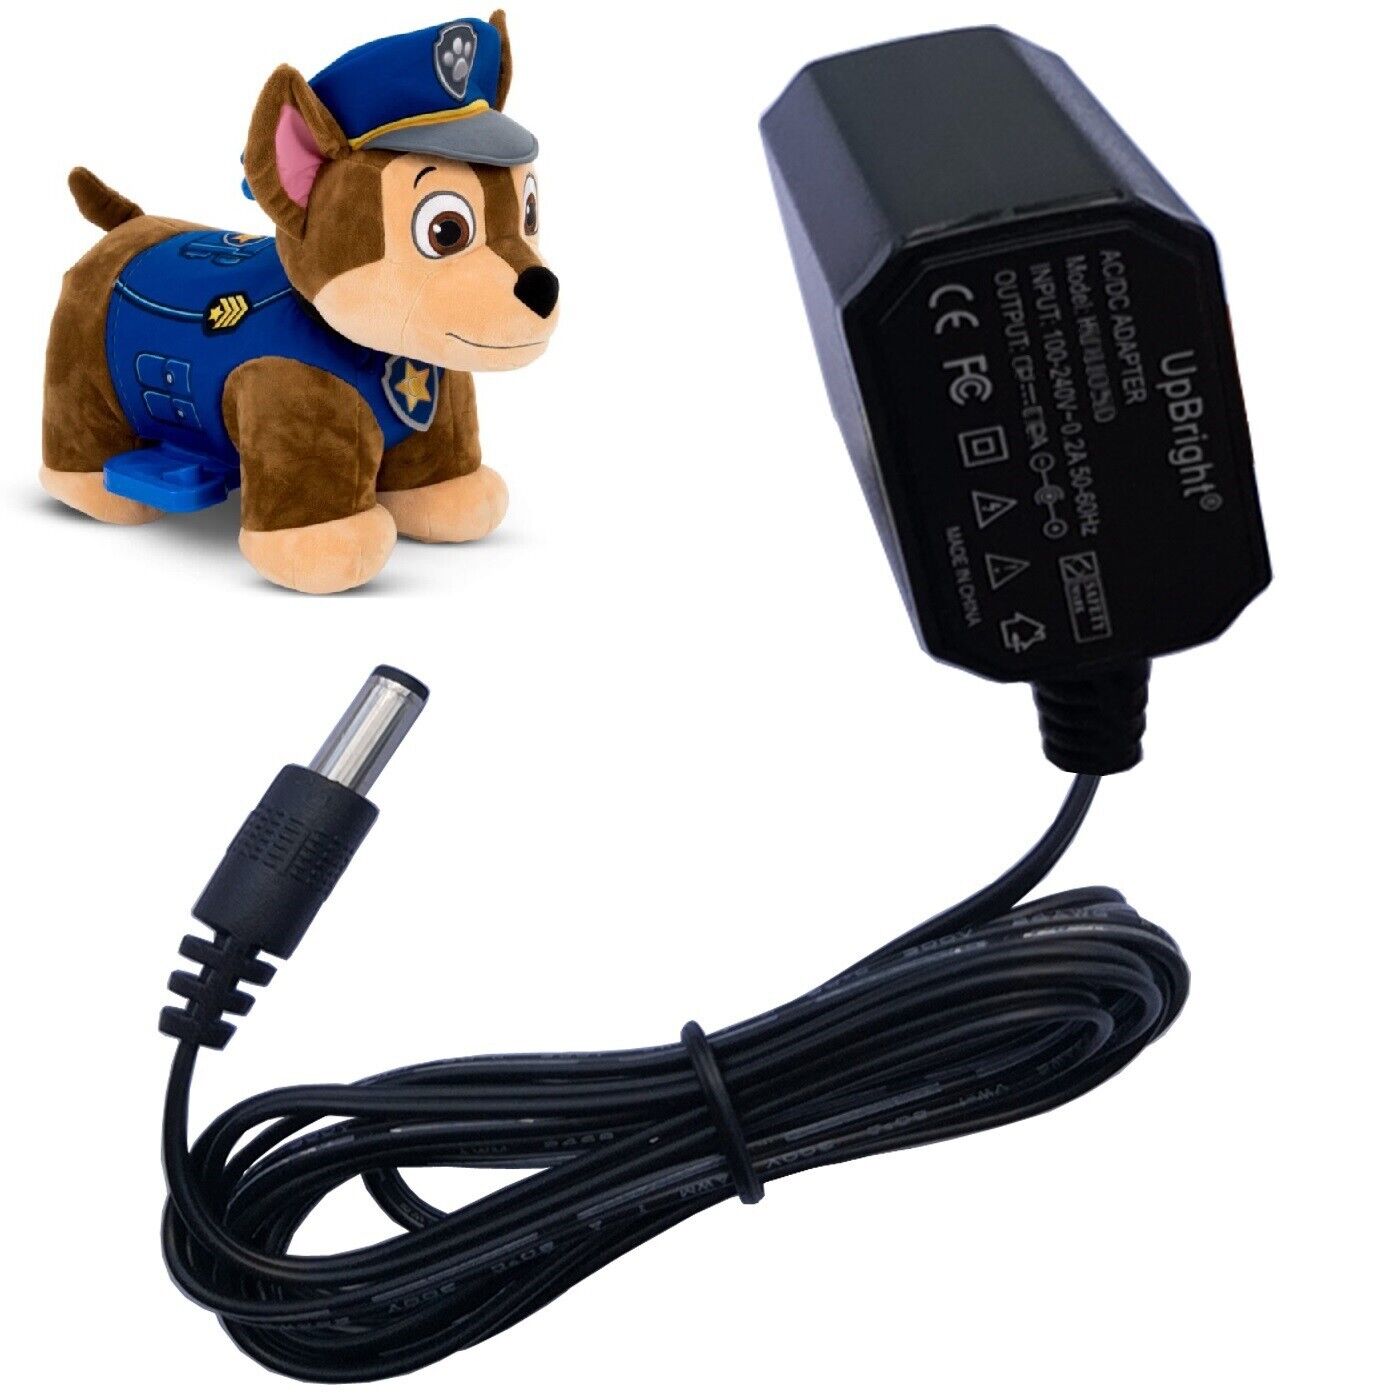 AC Adapter For Nick Jr. PAW Patrol Chase 6V Plush Electric Ride-On Toy Charger